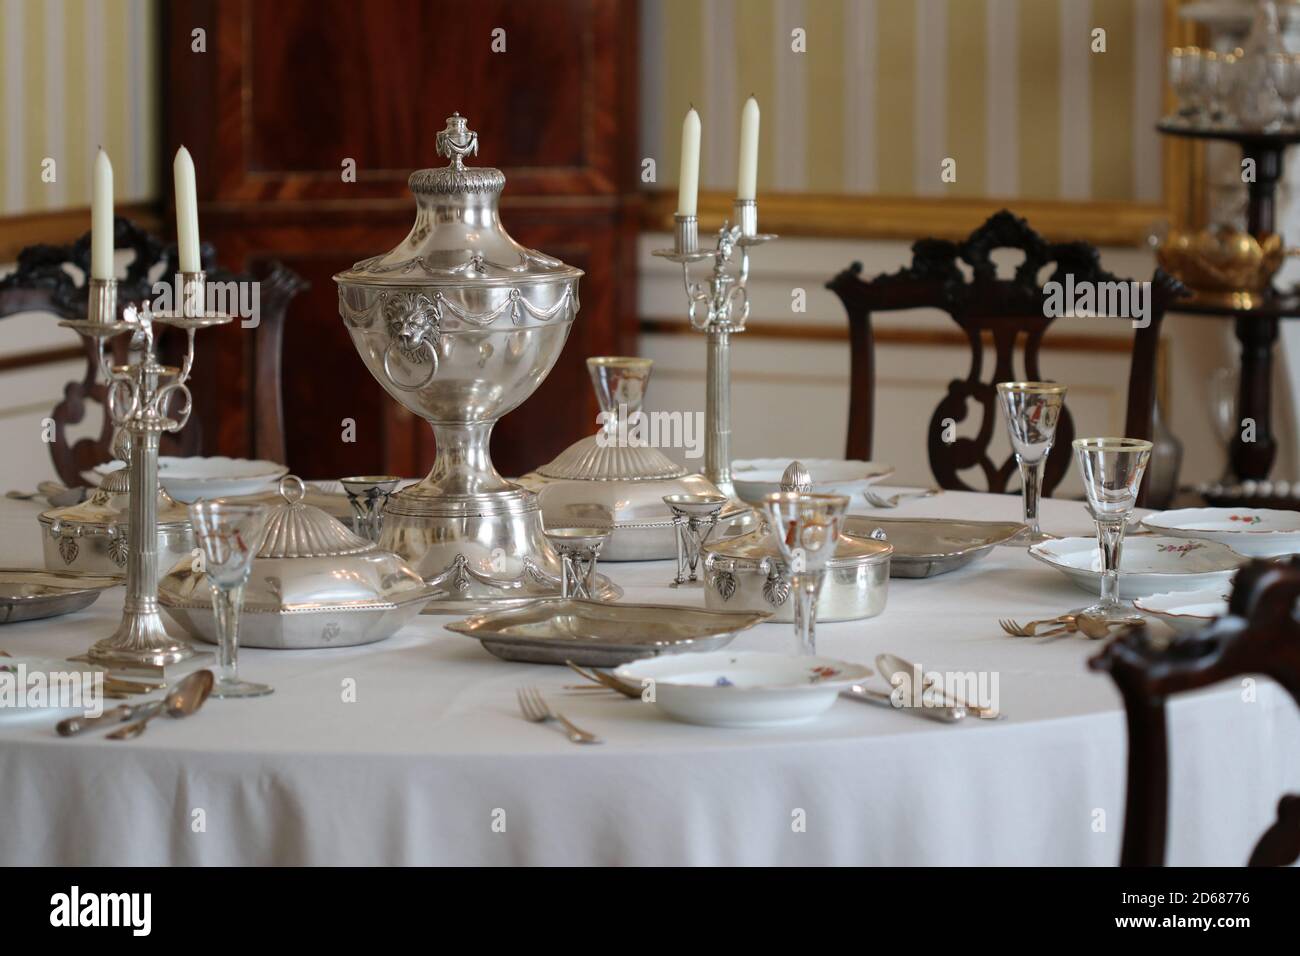 Old vintage silver tableware set out on table with white tablecloth in vintage interior Stock Photo